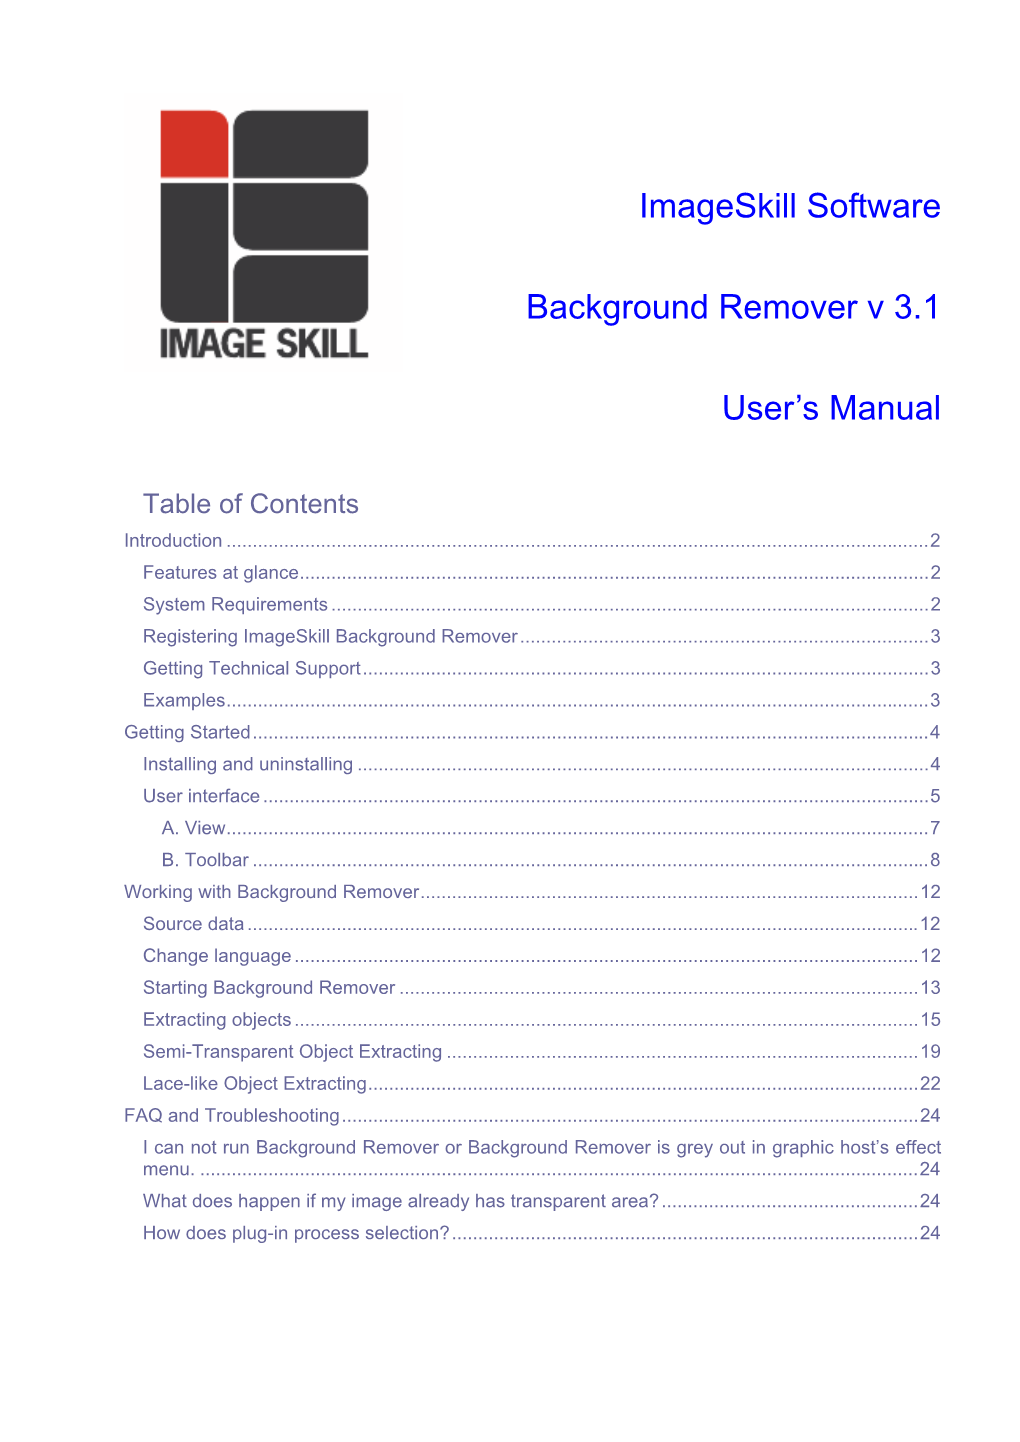 Background Remover User's Manual